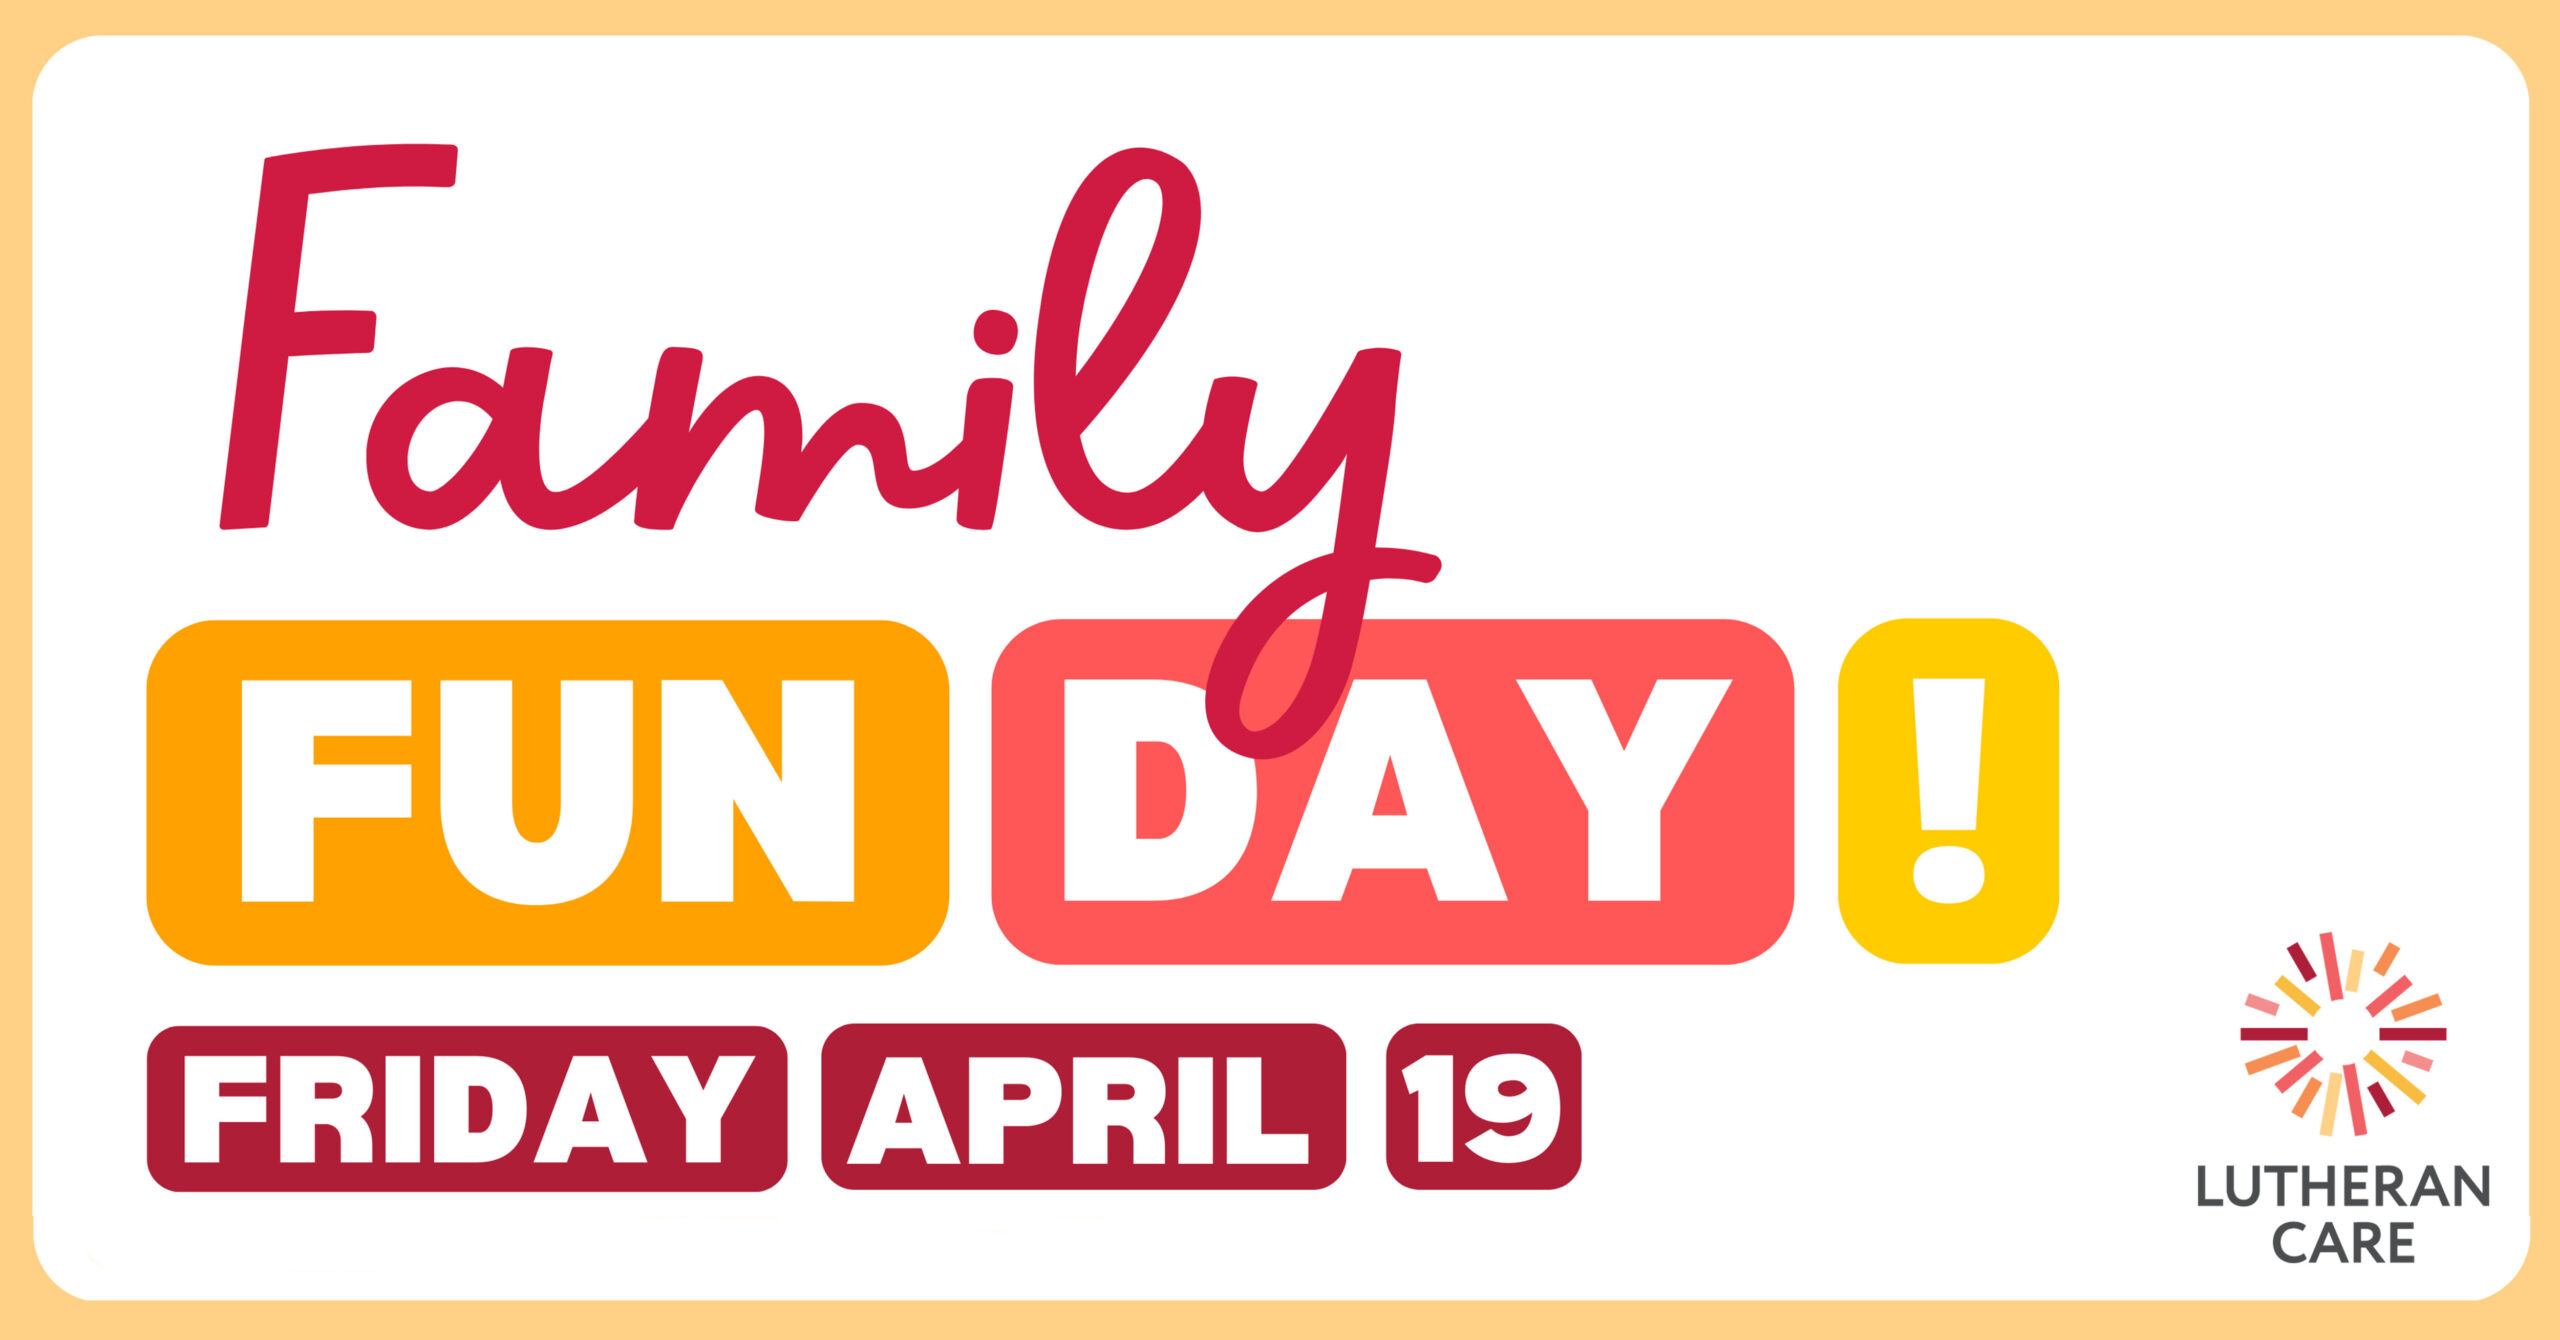 Text reads Family Fun Day Friday April 19. The Lutheran Care logo appears in the bottom right hand corner.